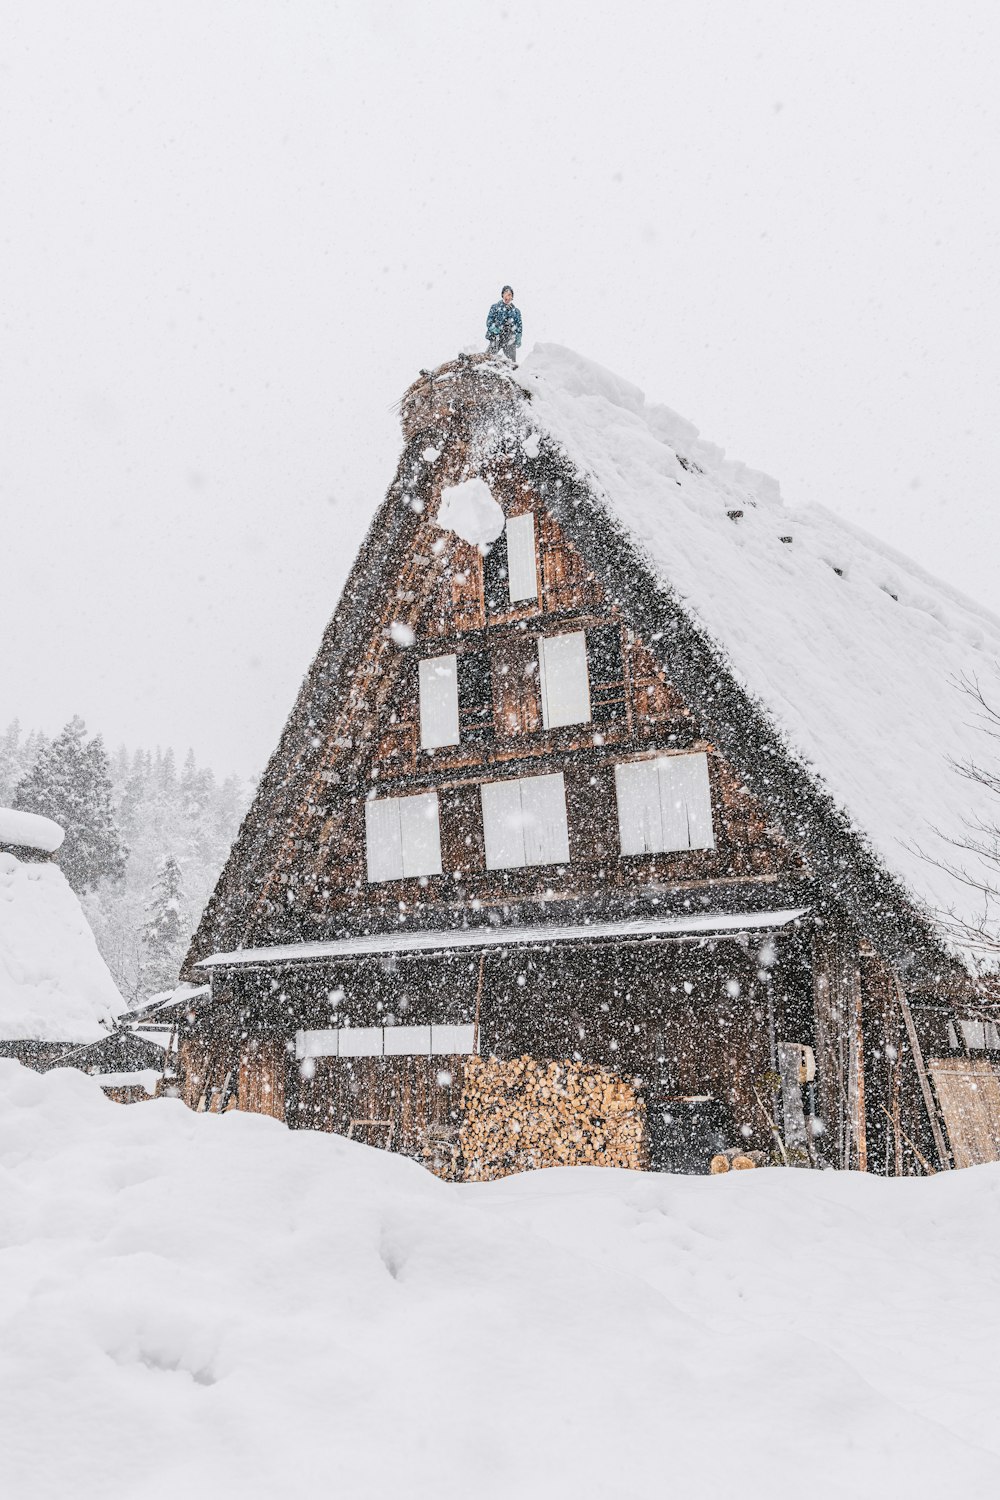 a house covered in snow with a person standing on top of it